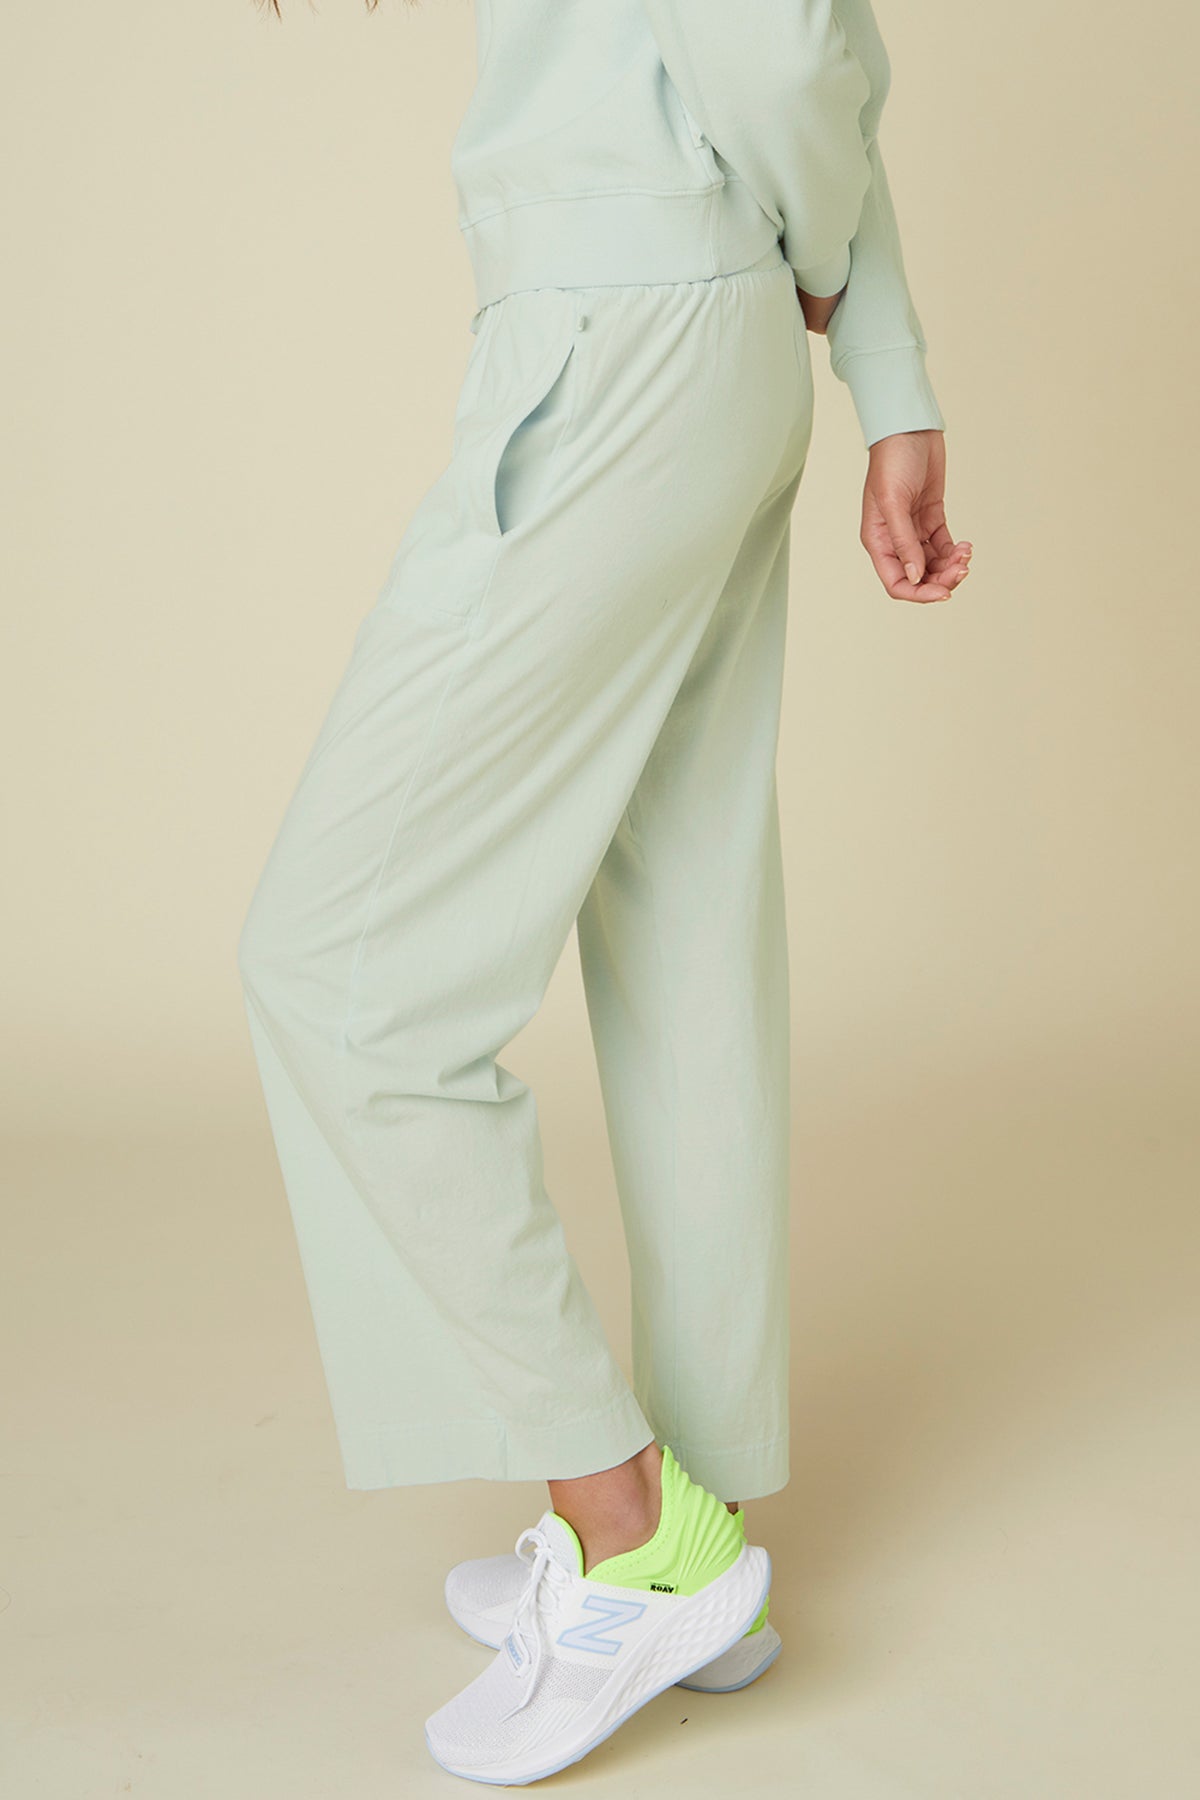   Pismo pant in pale mint green showing side and pocket. 